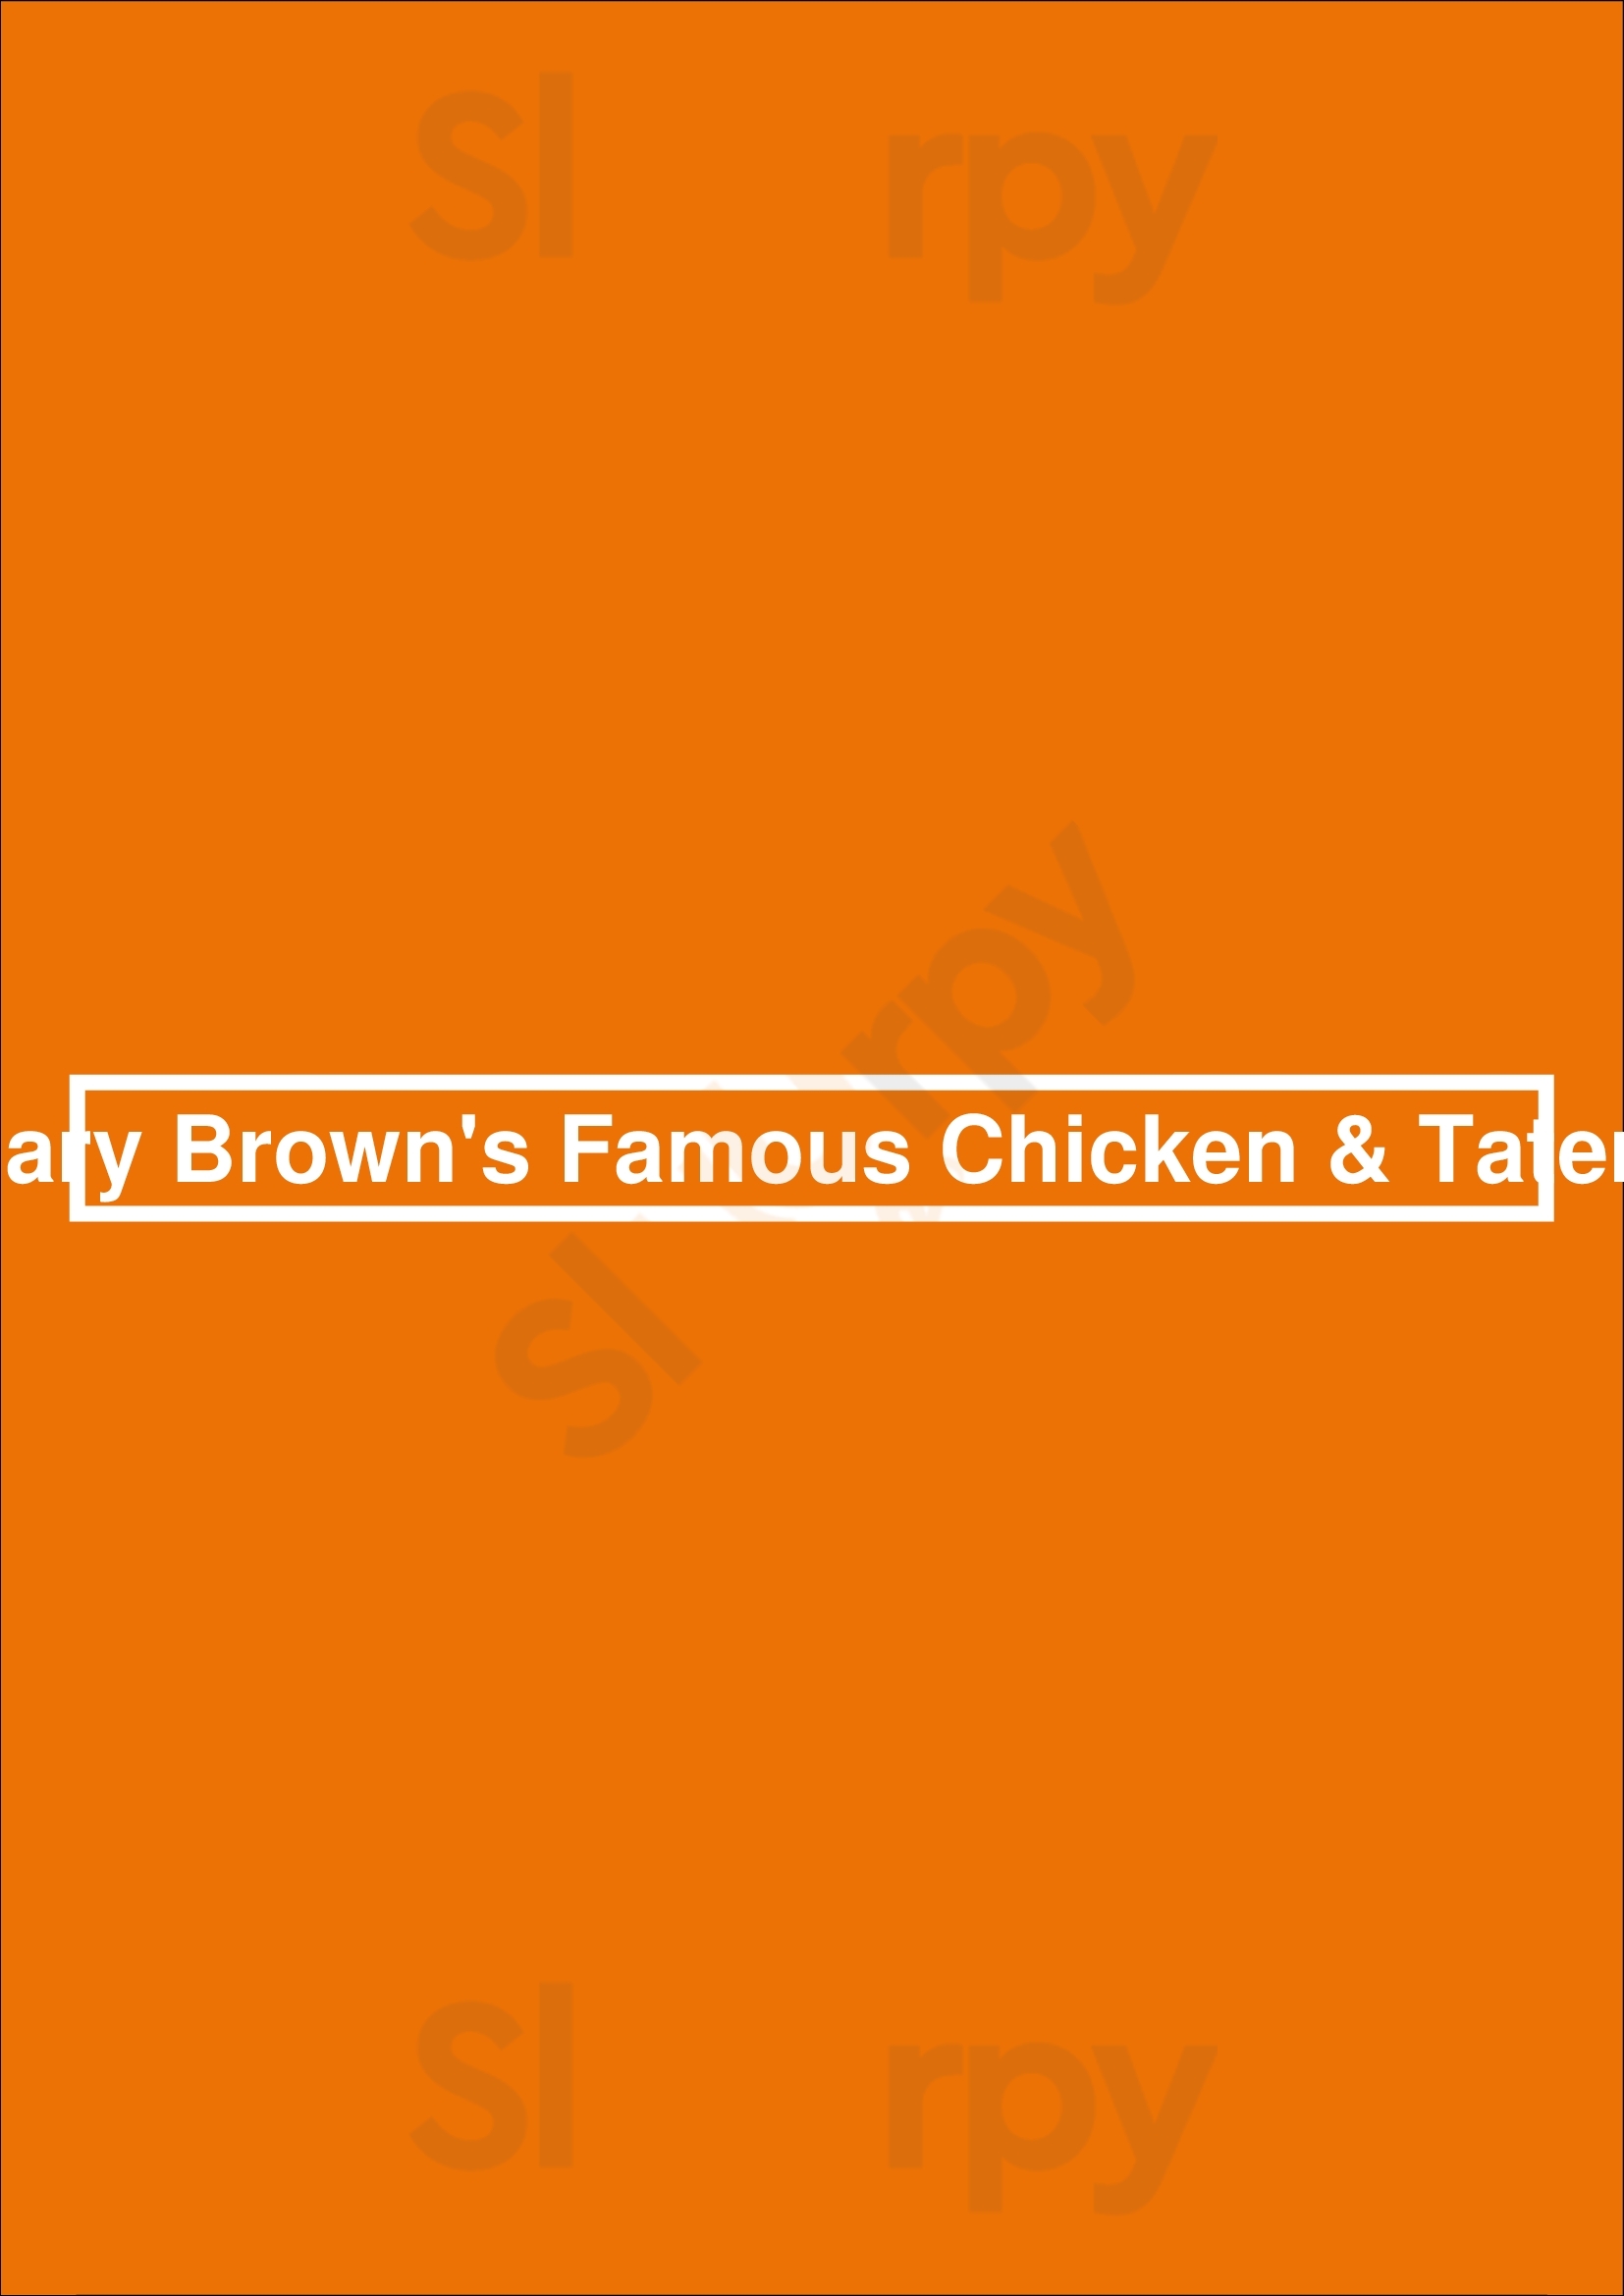 Mary Brown's Famous Chicken & Taters Mississauga Menu - 1